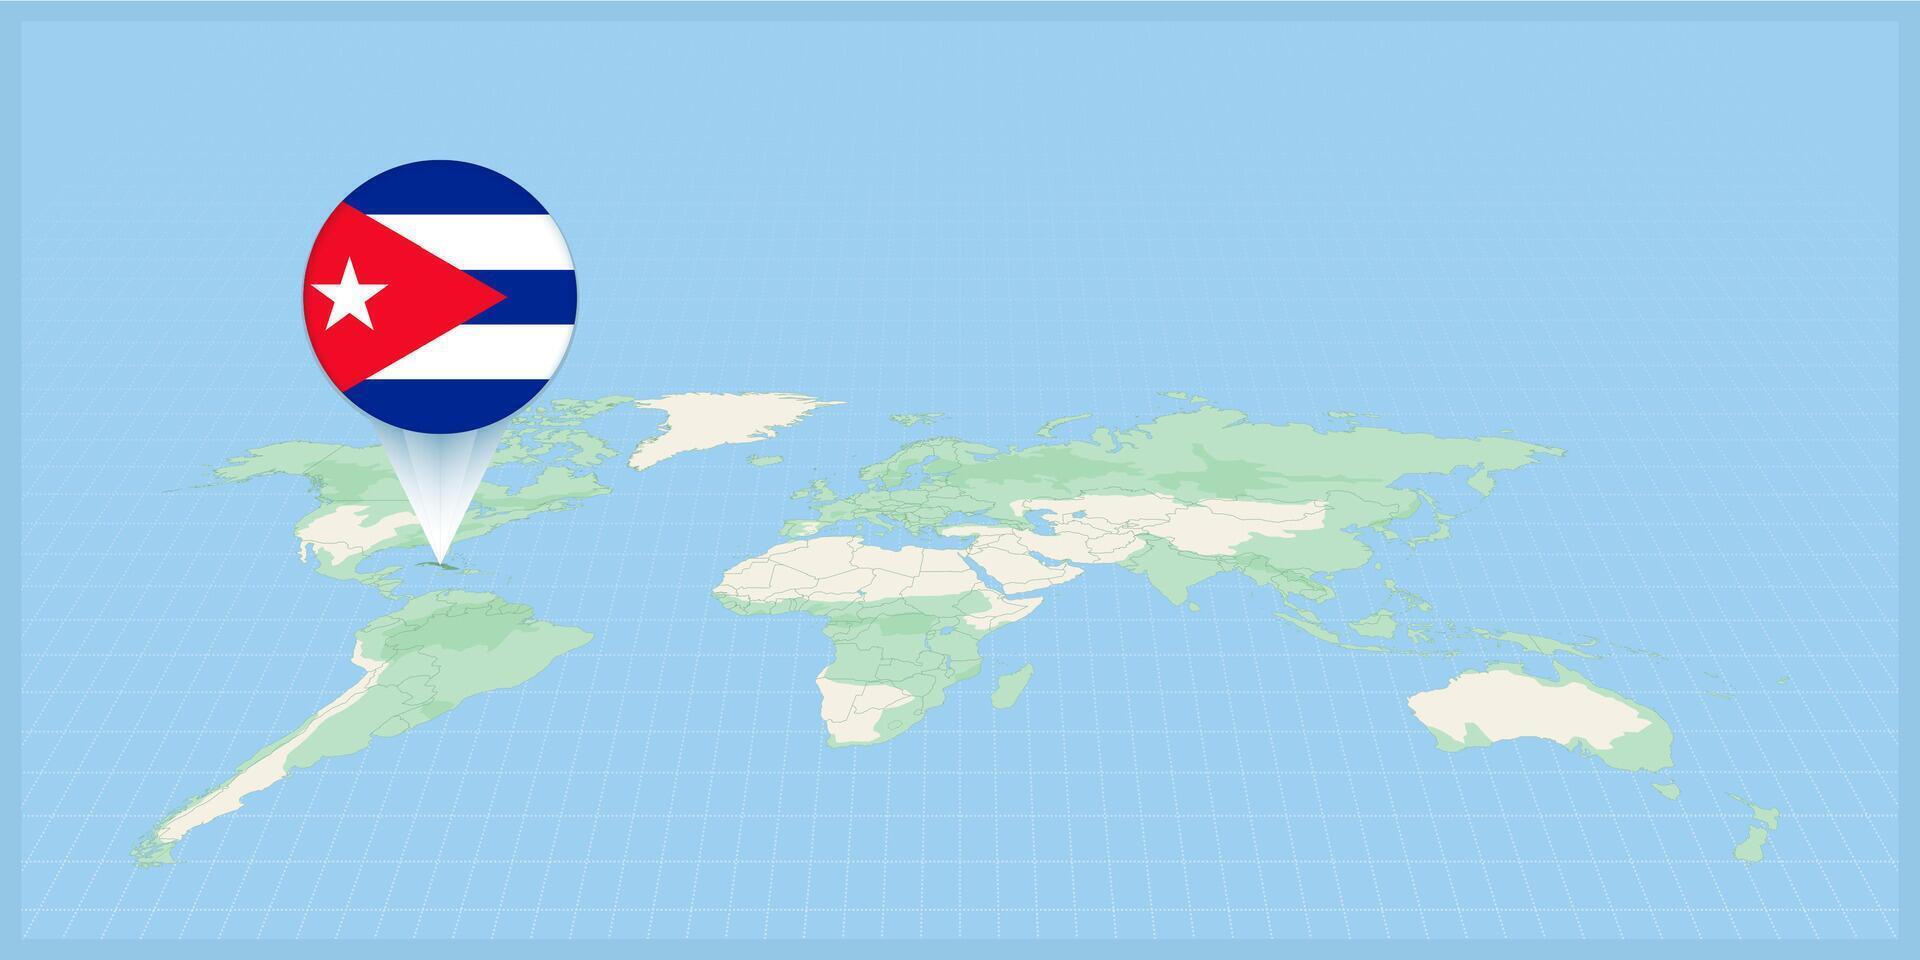 Location of Cuba on the world map, marked with Cuba flag pin. vector